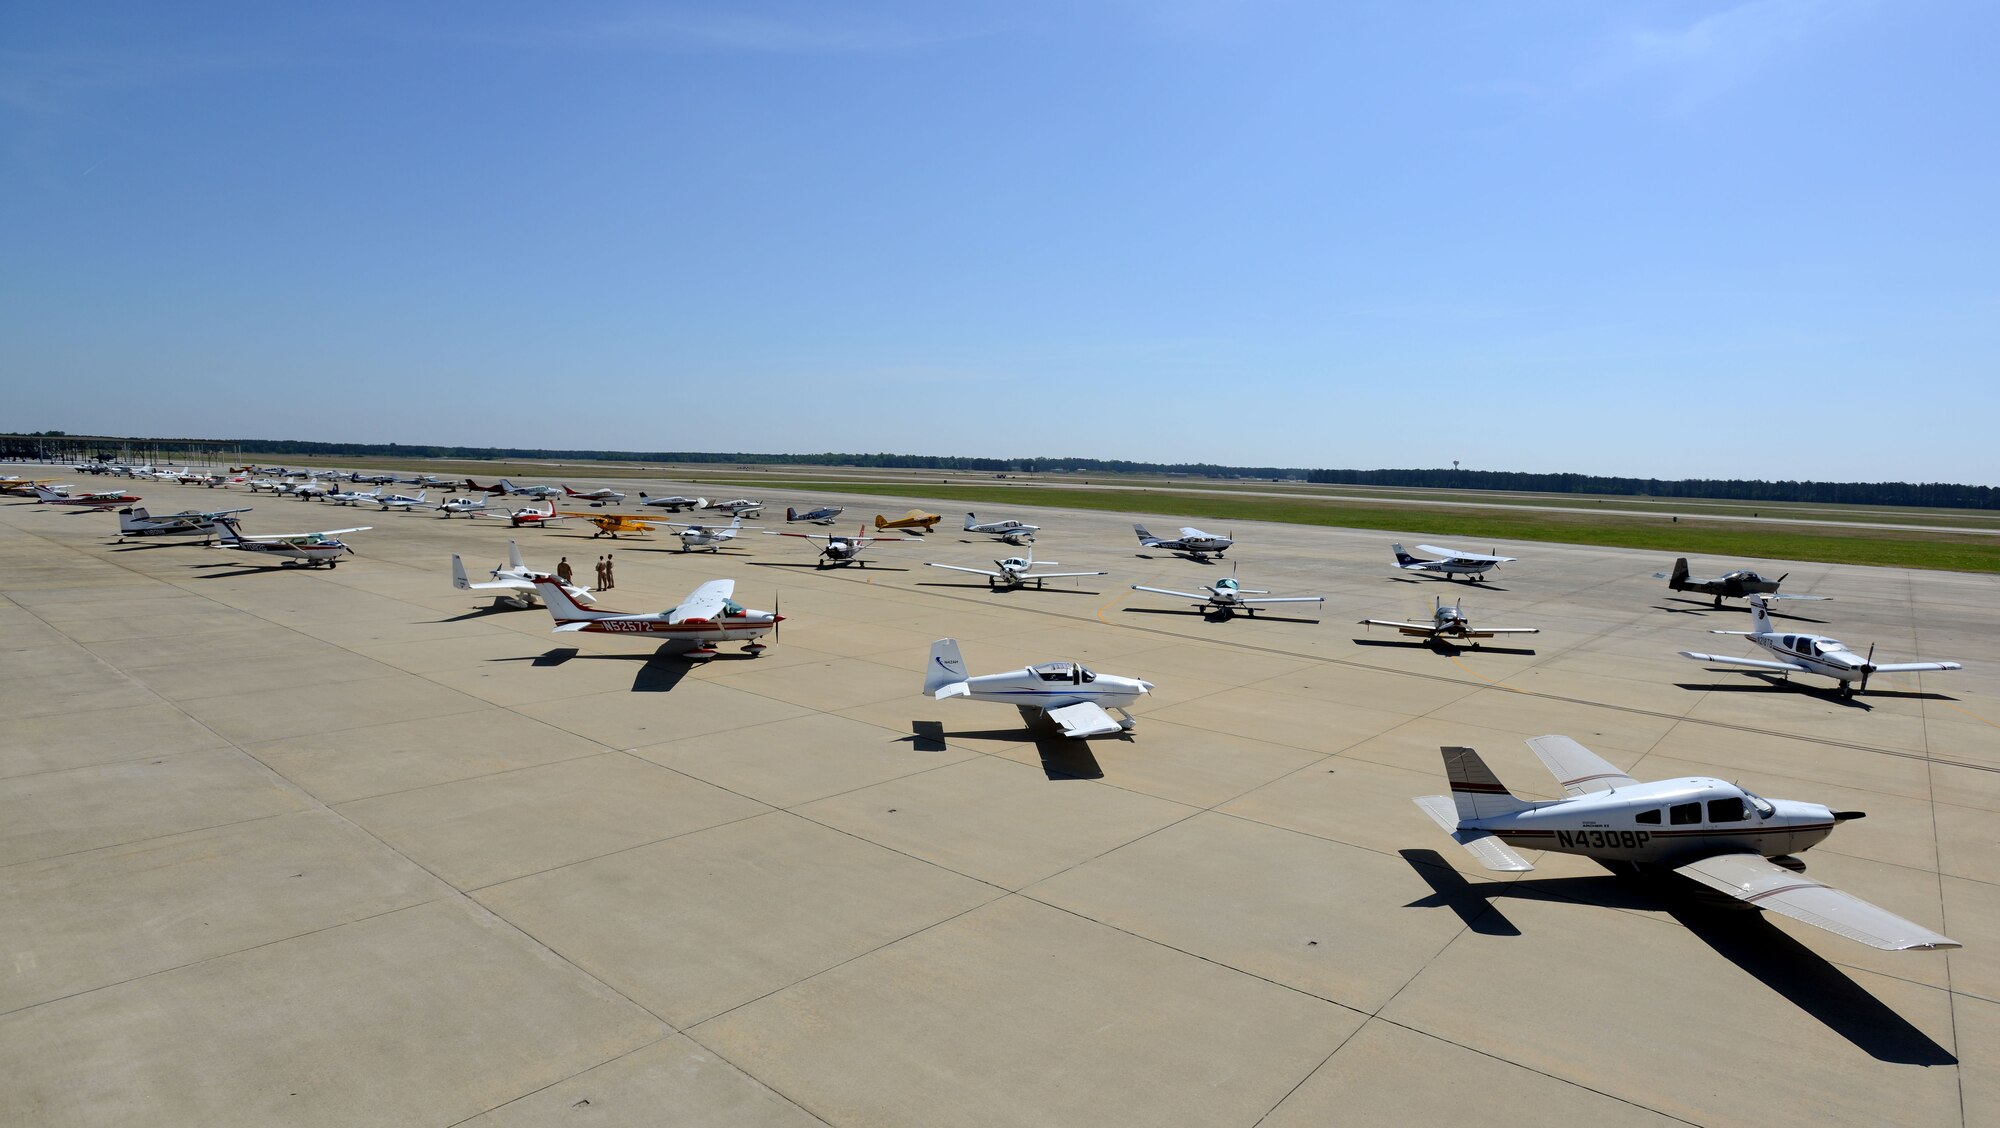 Aircraft line the runway at Shaw Air Force Base, S.C., April 29, 2016. The 20th Fighter Wing invited civilian pilots from all over the region to participate in a General Aviation Fly-In event. (U.S. Air Force photo by Airman 1st Class Kelsey Tucker)